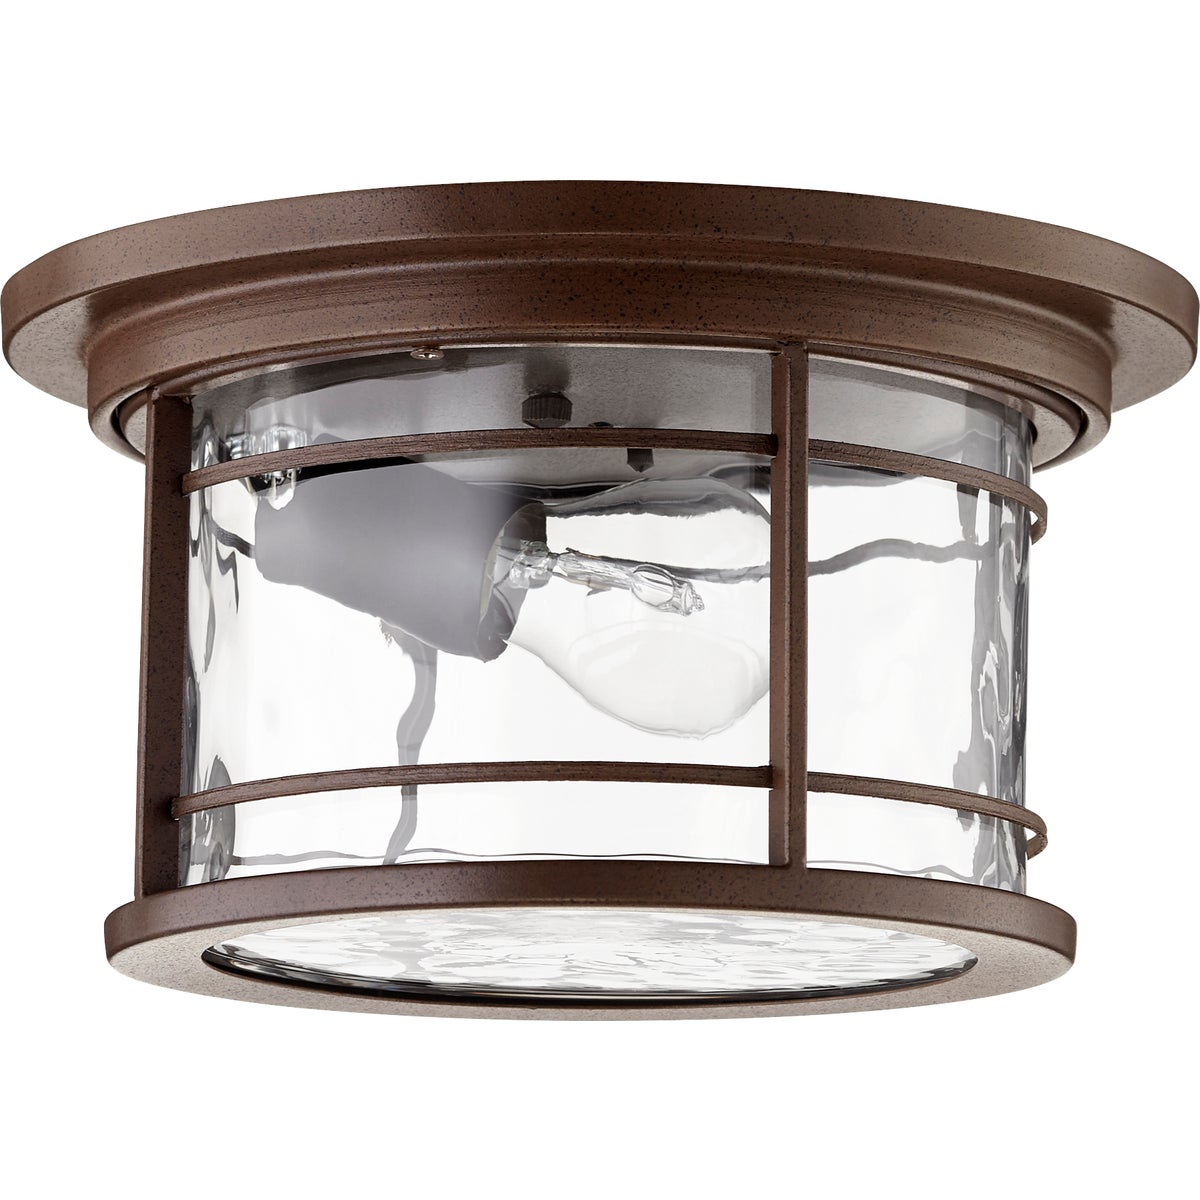 Modern Outdoor Ceiling Light with clear glass shade and oiled bronze finish. Clean-lined elongated drum silhouette. Casts a beautiful glow.